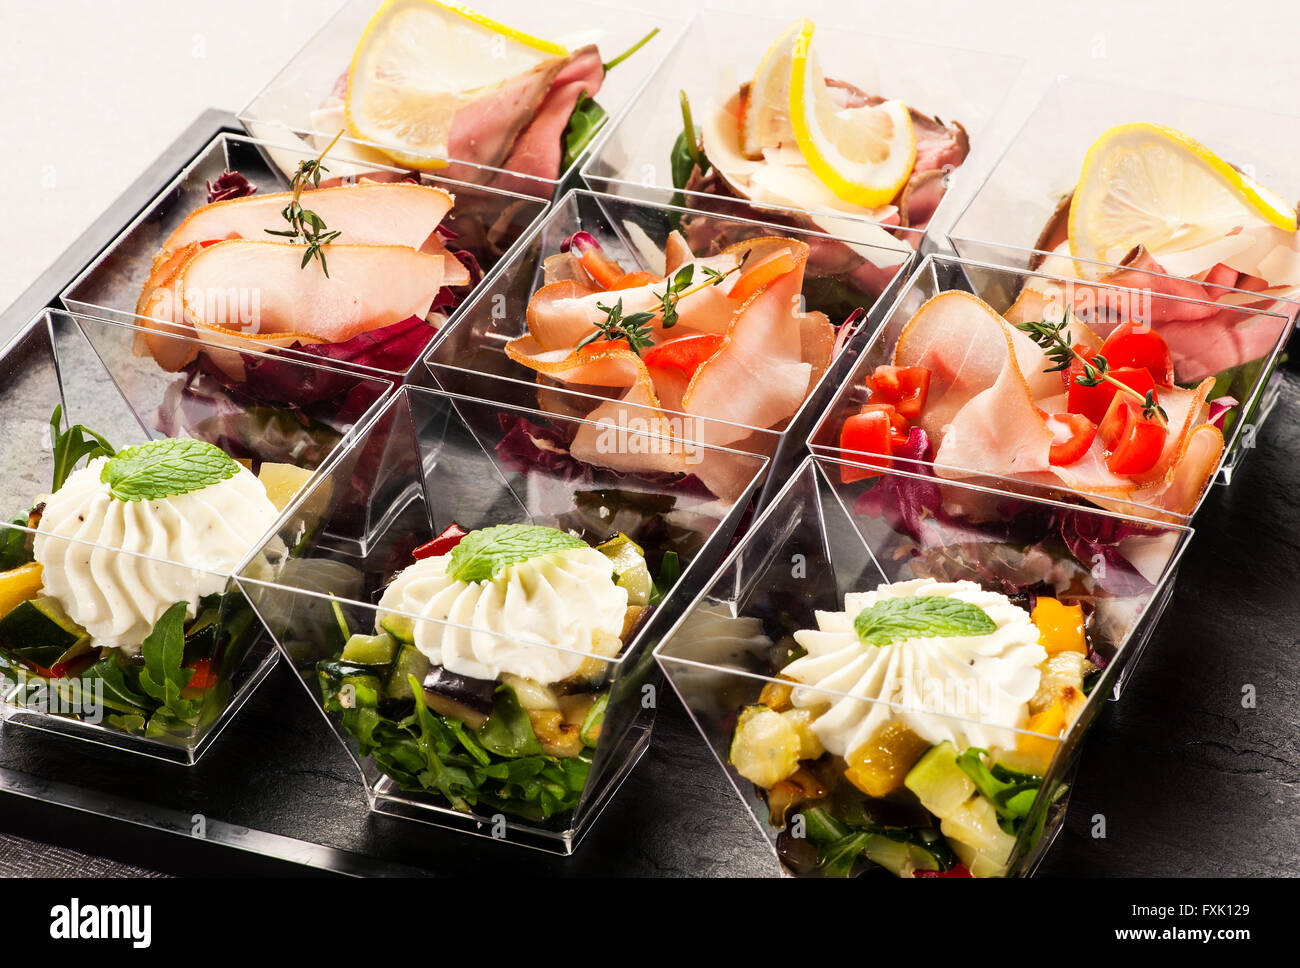 Cute rectangular slanted glass containers filled with delicious appetizers made of fruit, meat and herbs Stock Photo